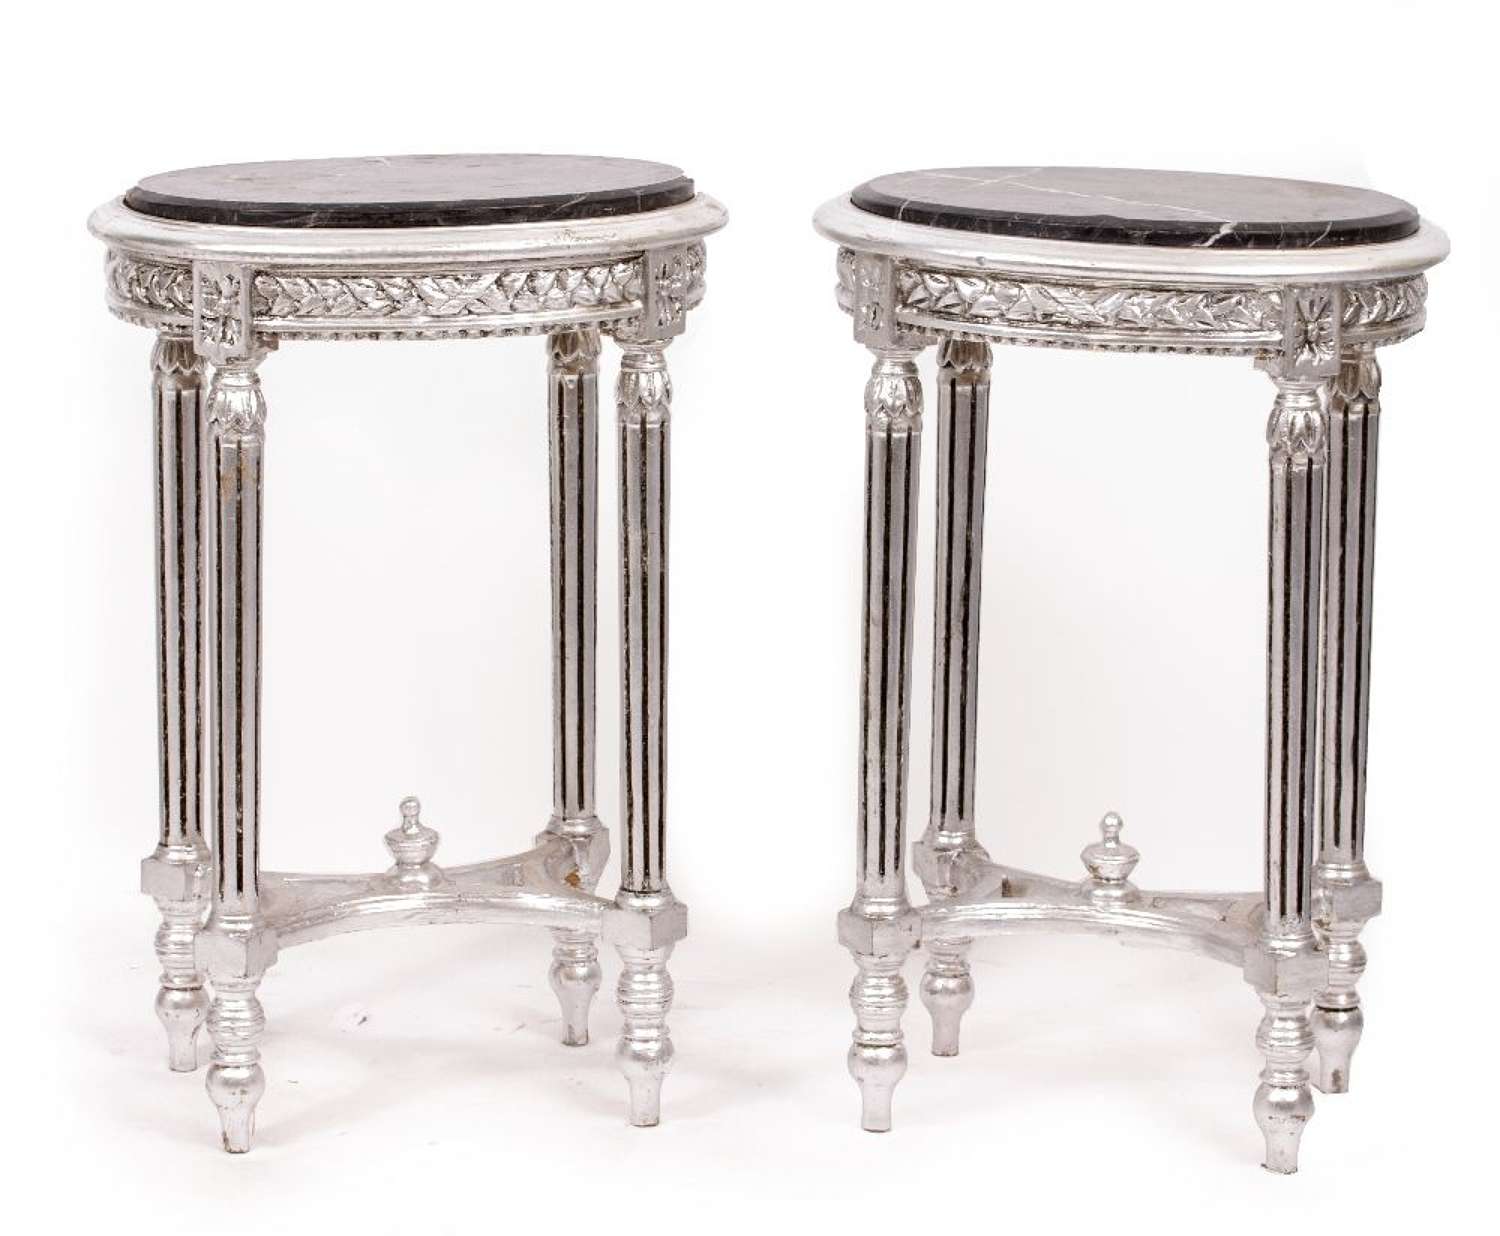 A Pair of Oval Shaped Marble Topped Bedside/Occasional Tables